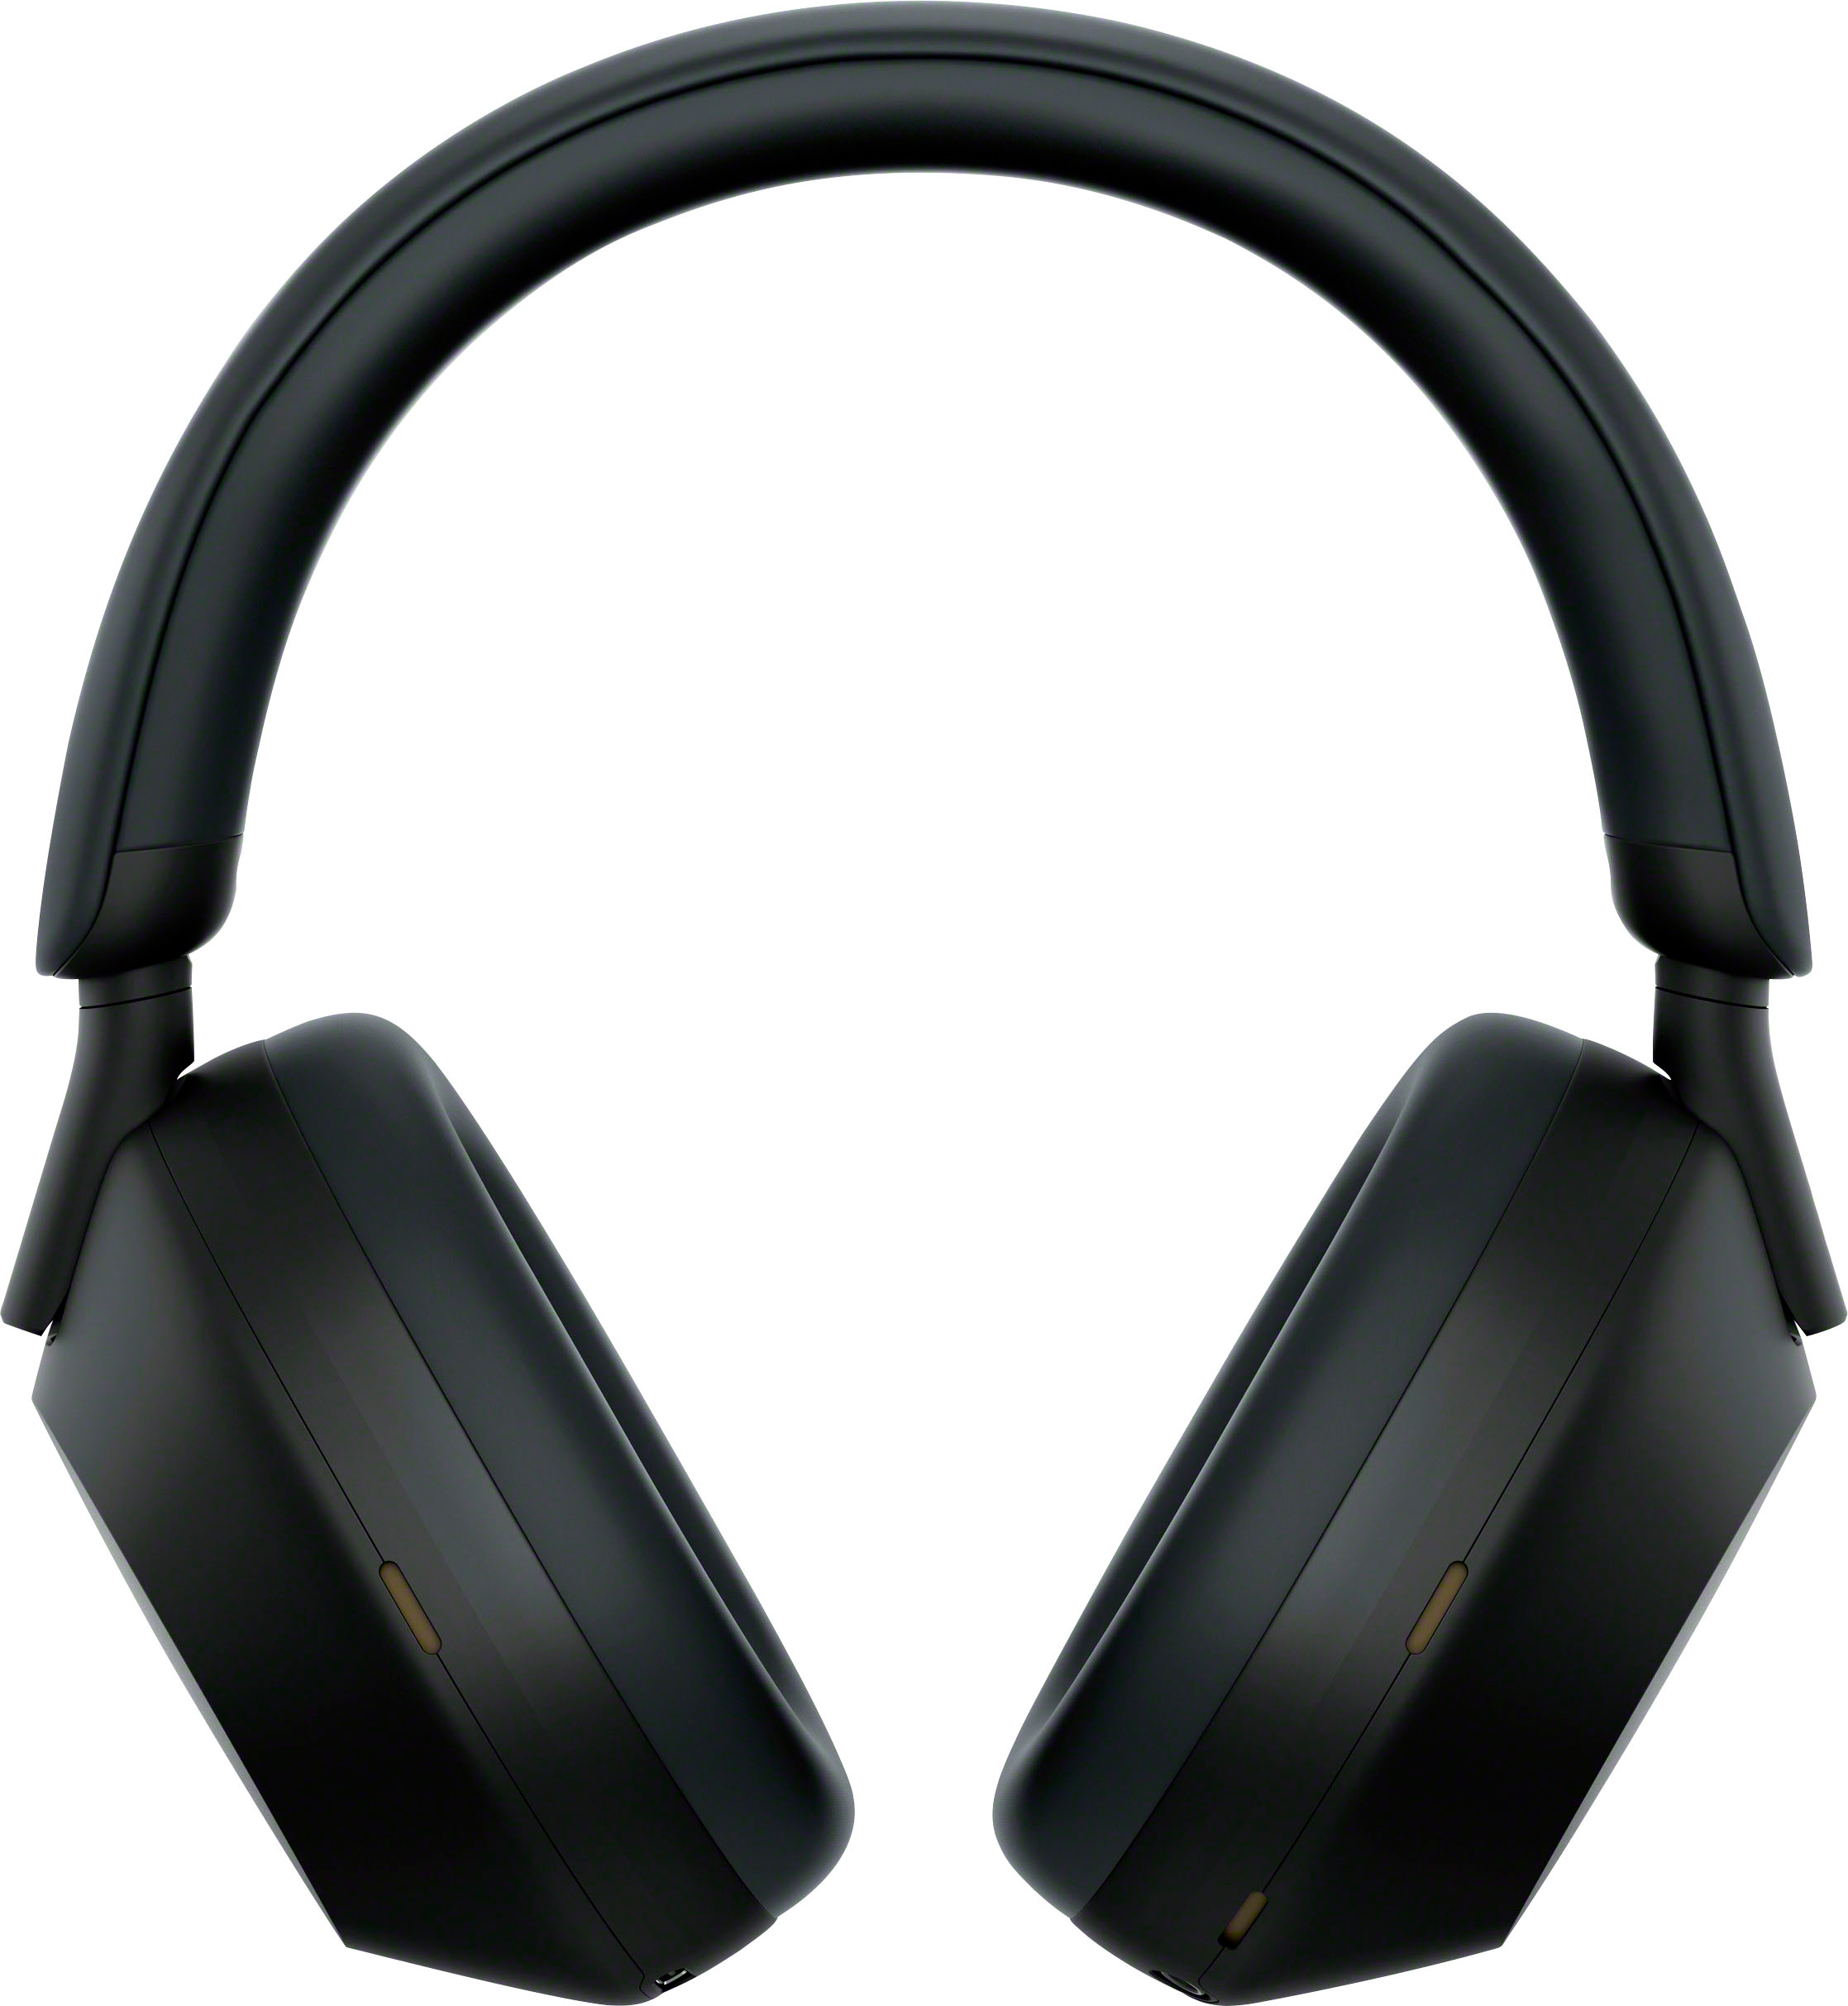 Zoom in on Angle Zoom. Sony - WH-1000XM5 Wireless Noise-Canceling Headphones - Black.